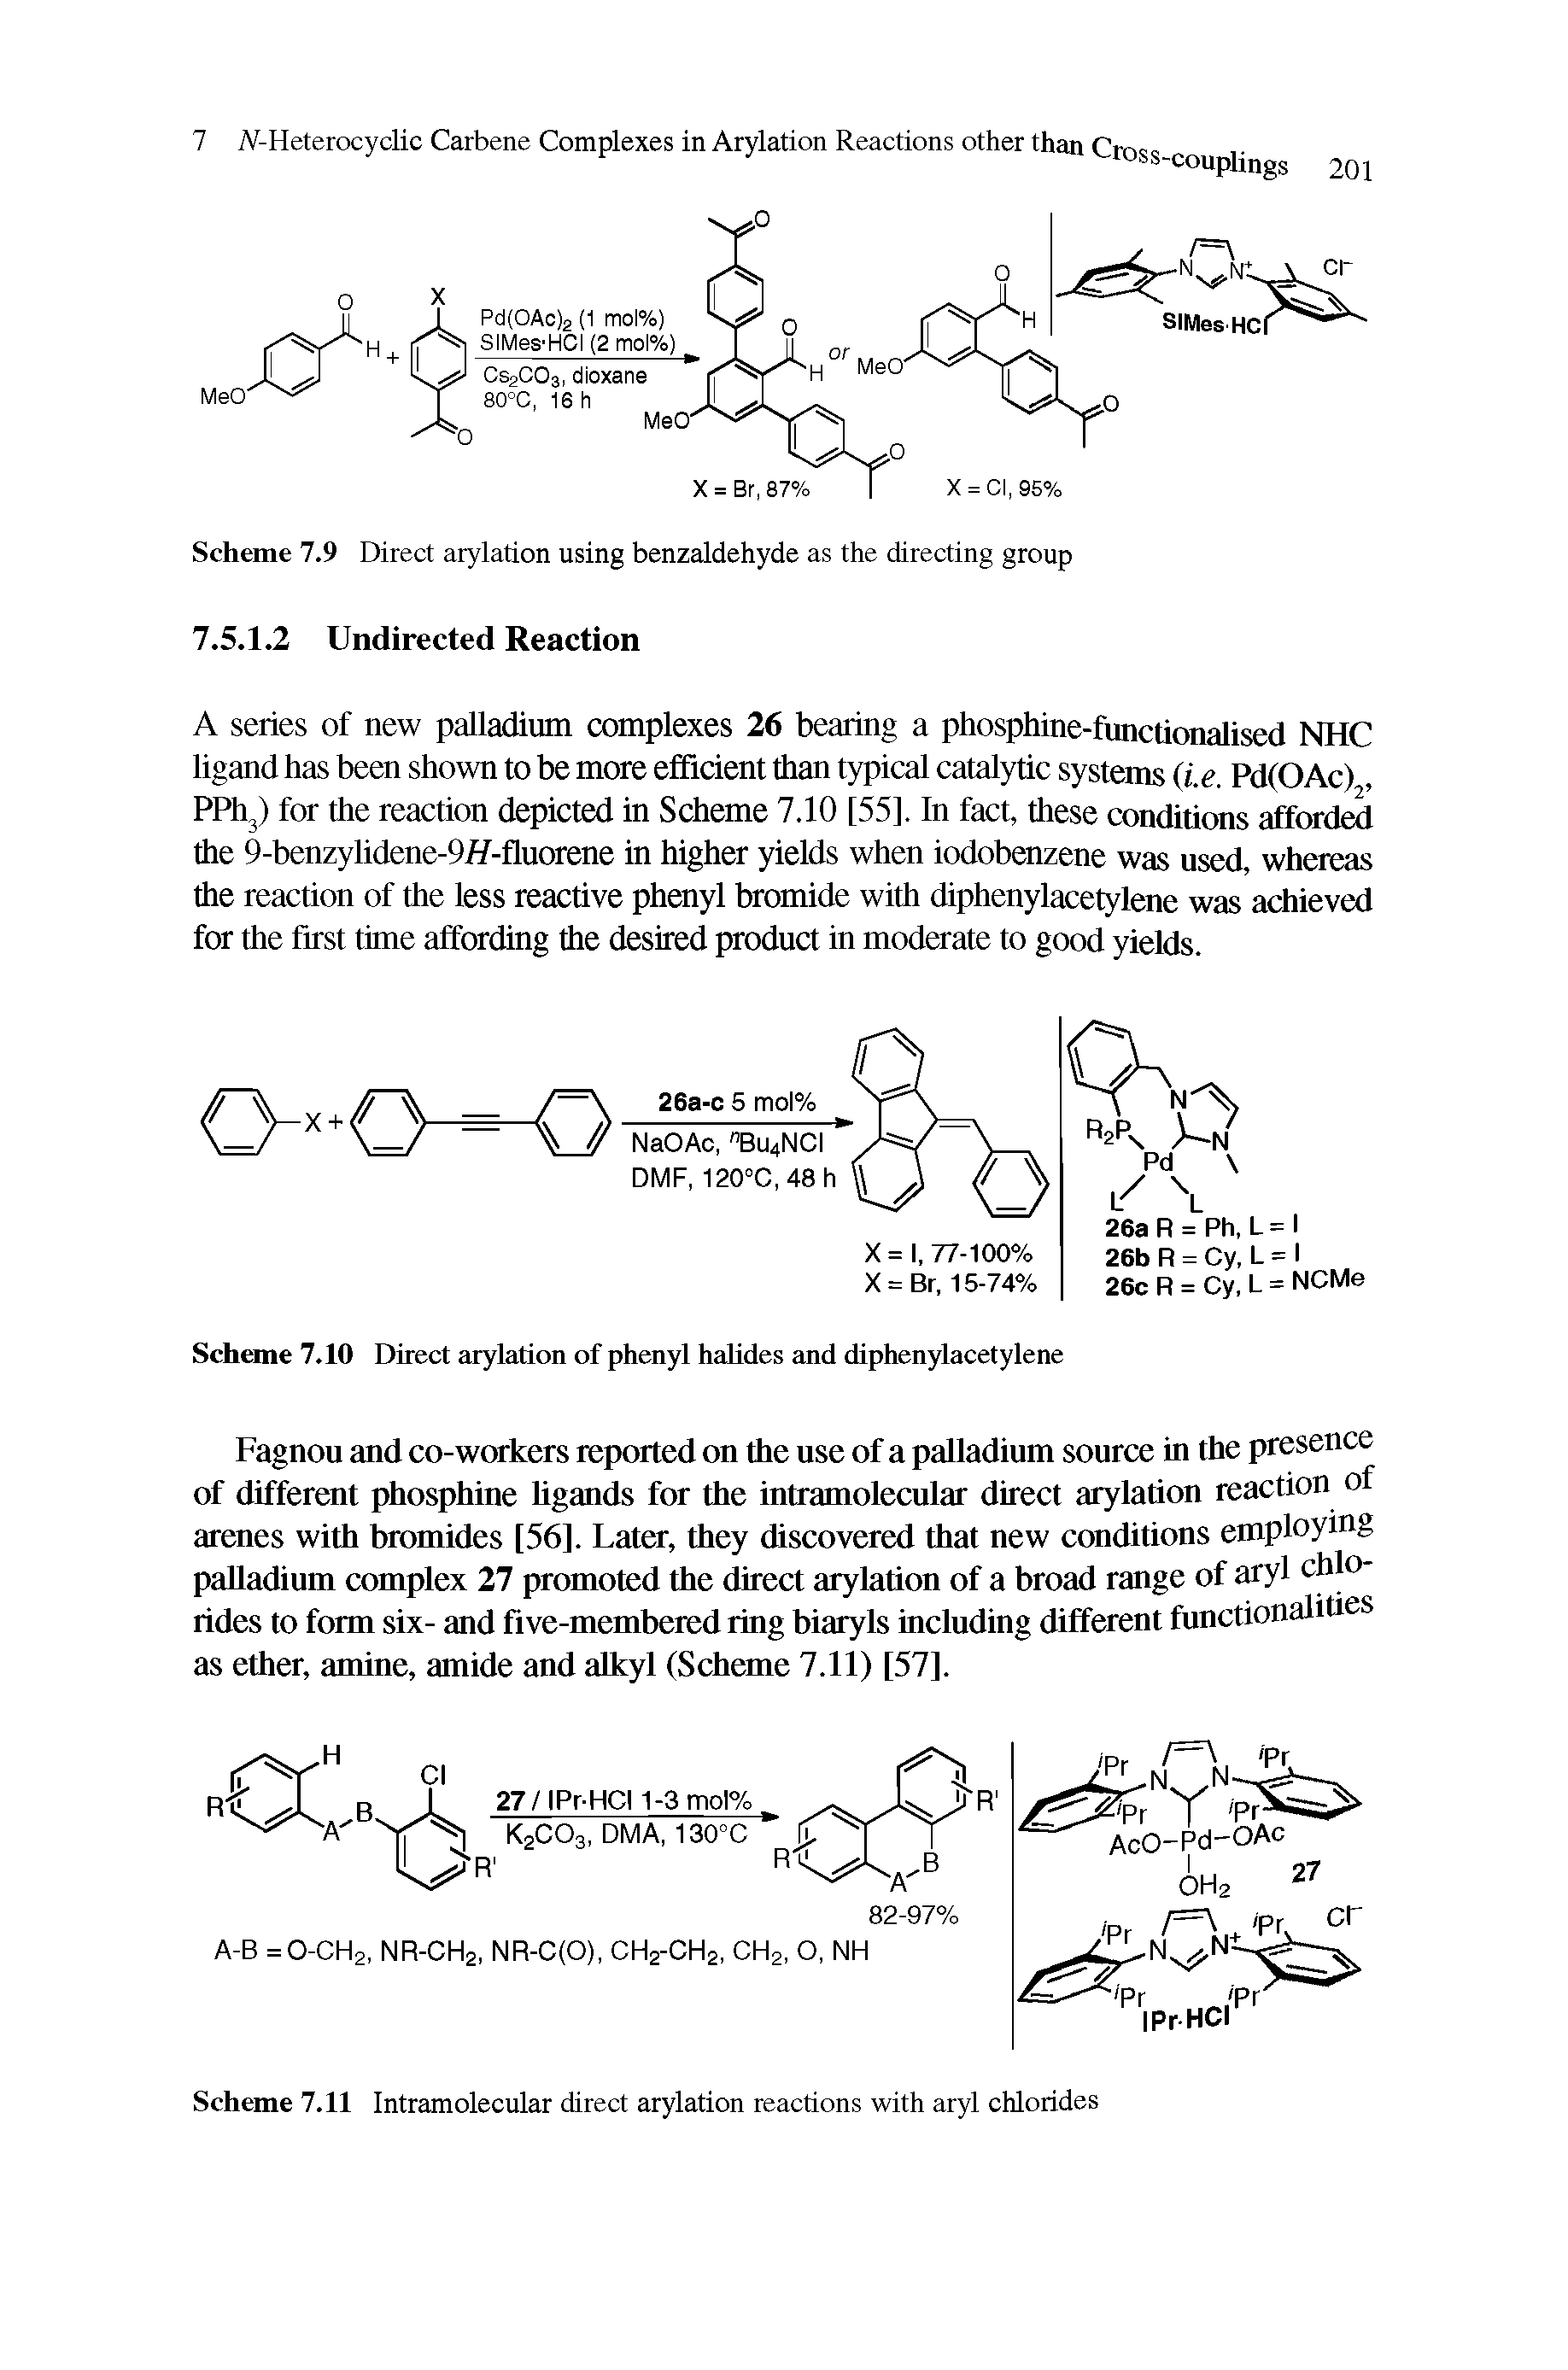 Scheme 7.11 Intramolecular direct arylation reactions with aryl chlorides...